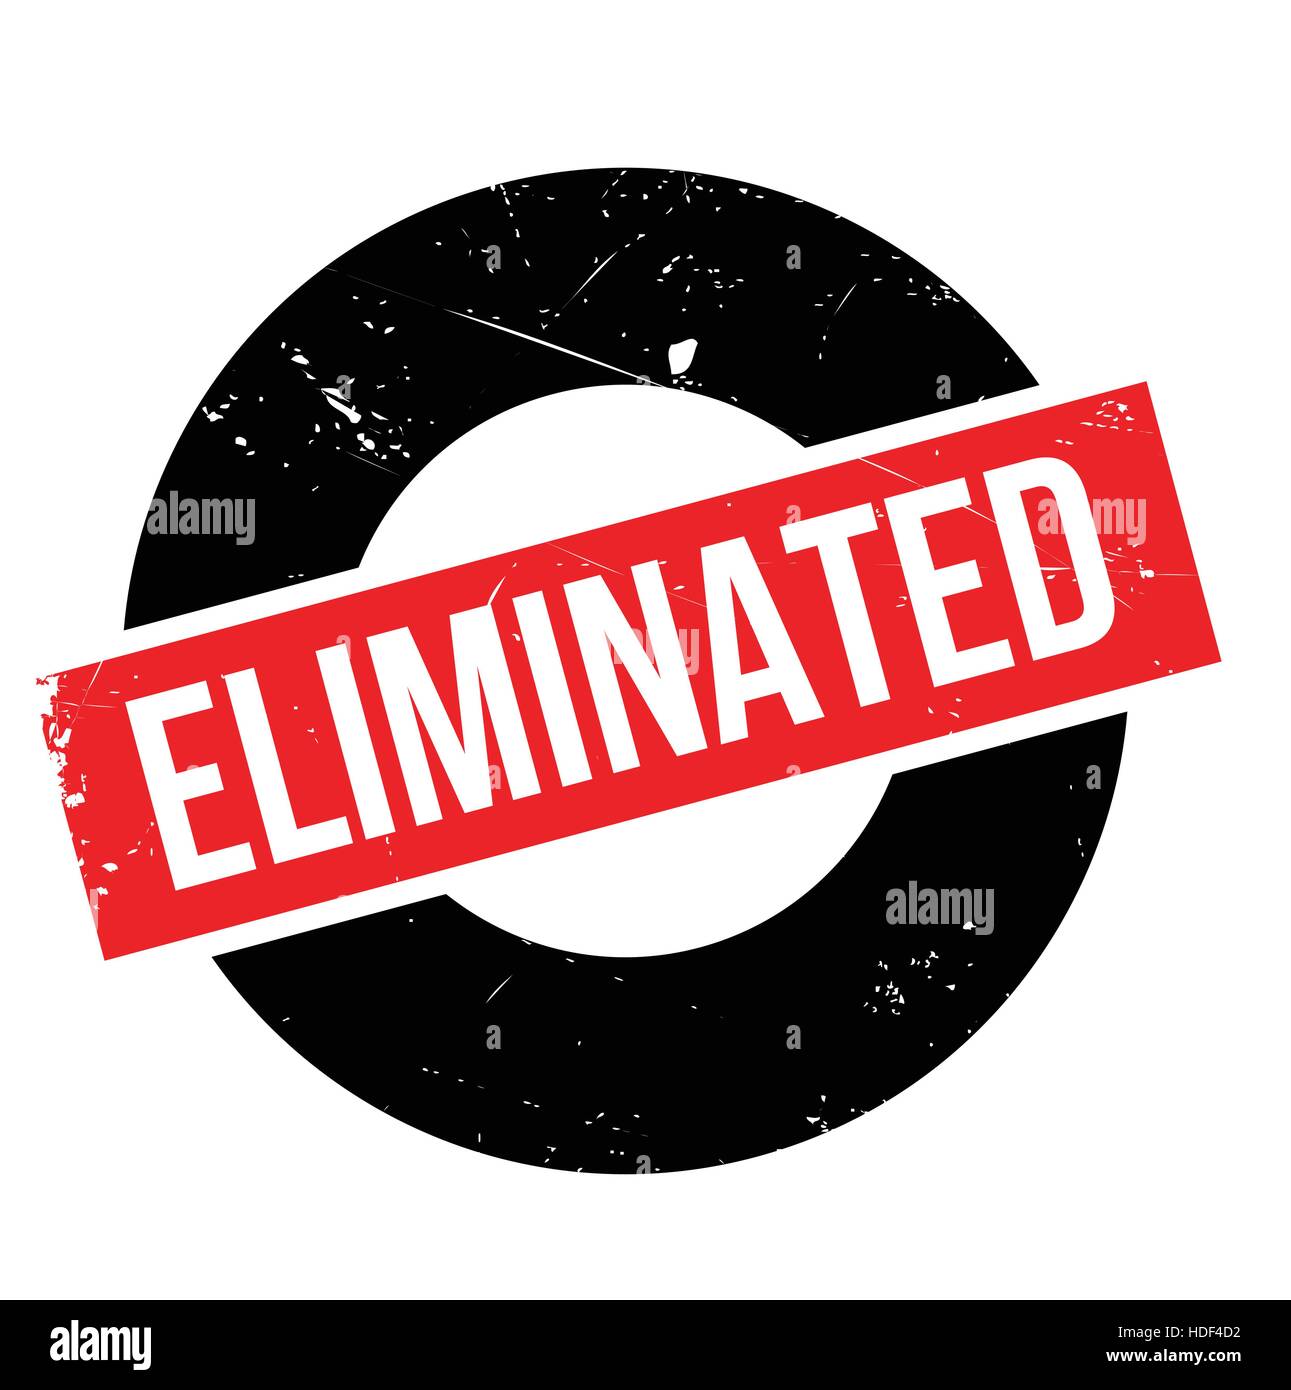 Eliminated rubber stamp. Grunge design with dust scratches. Effects can be easily removed for a clean, crisp look. Color is easily changed. Stock Vector